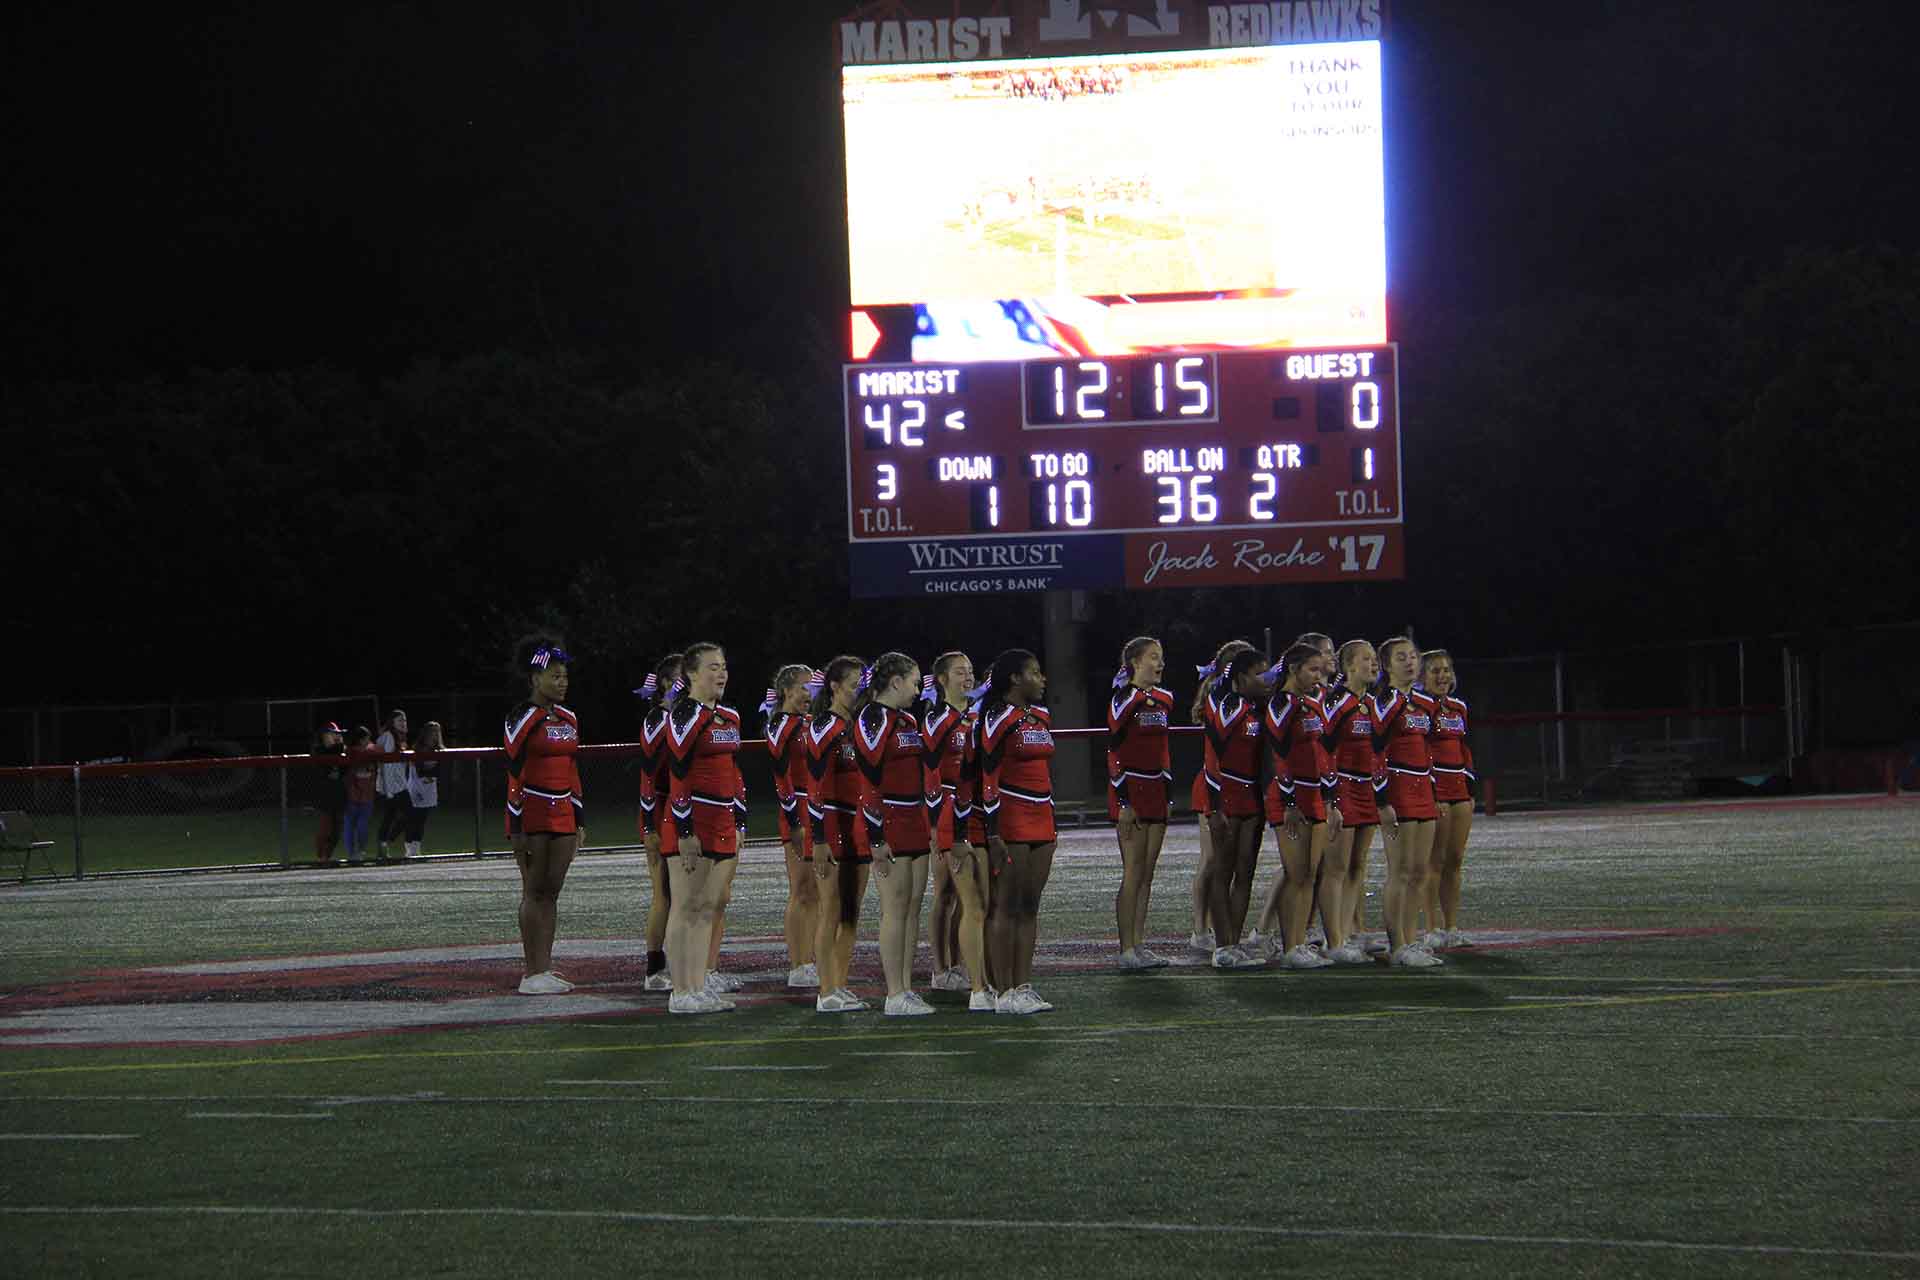 2017-5-Year-Reunion-and-Scoreboard-Dedication-cheerleaders-with-score-board-in-the-background